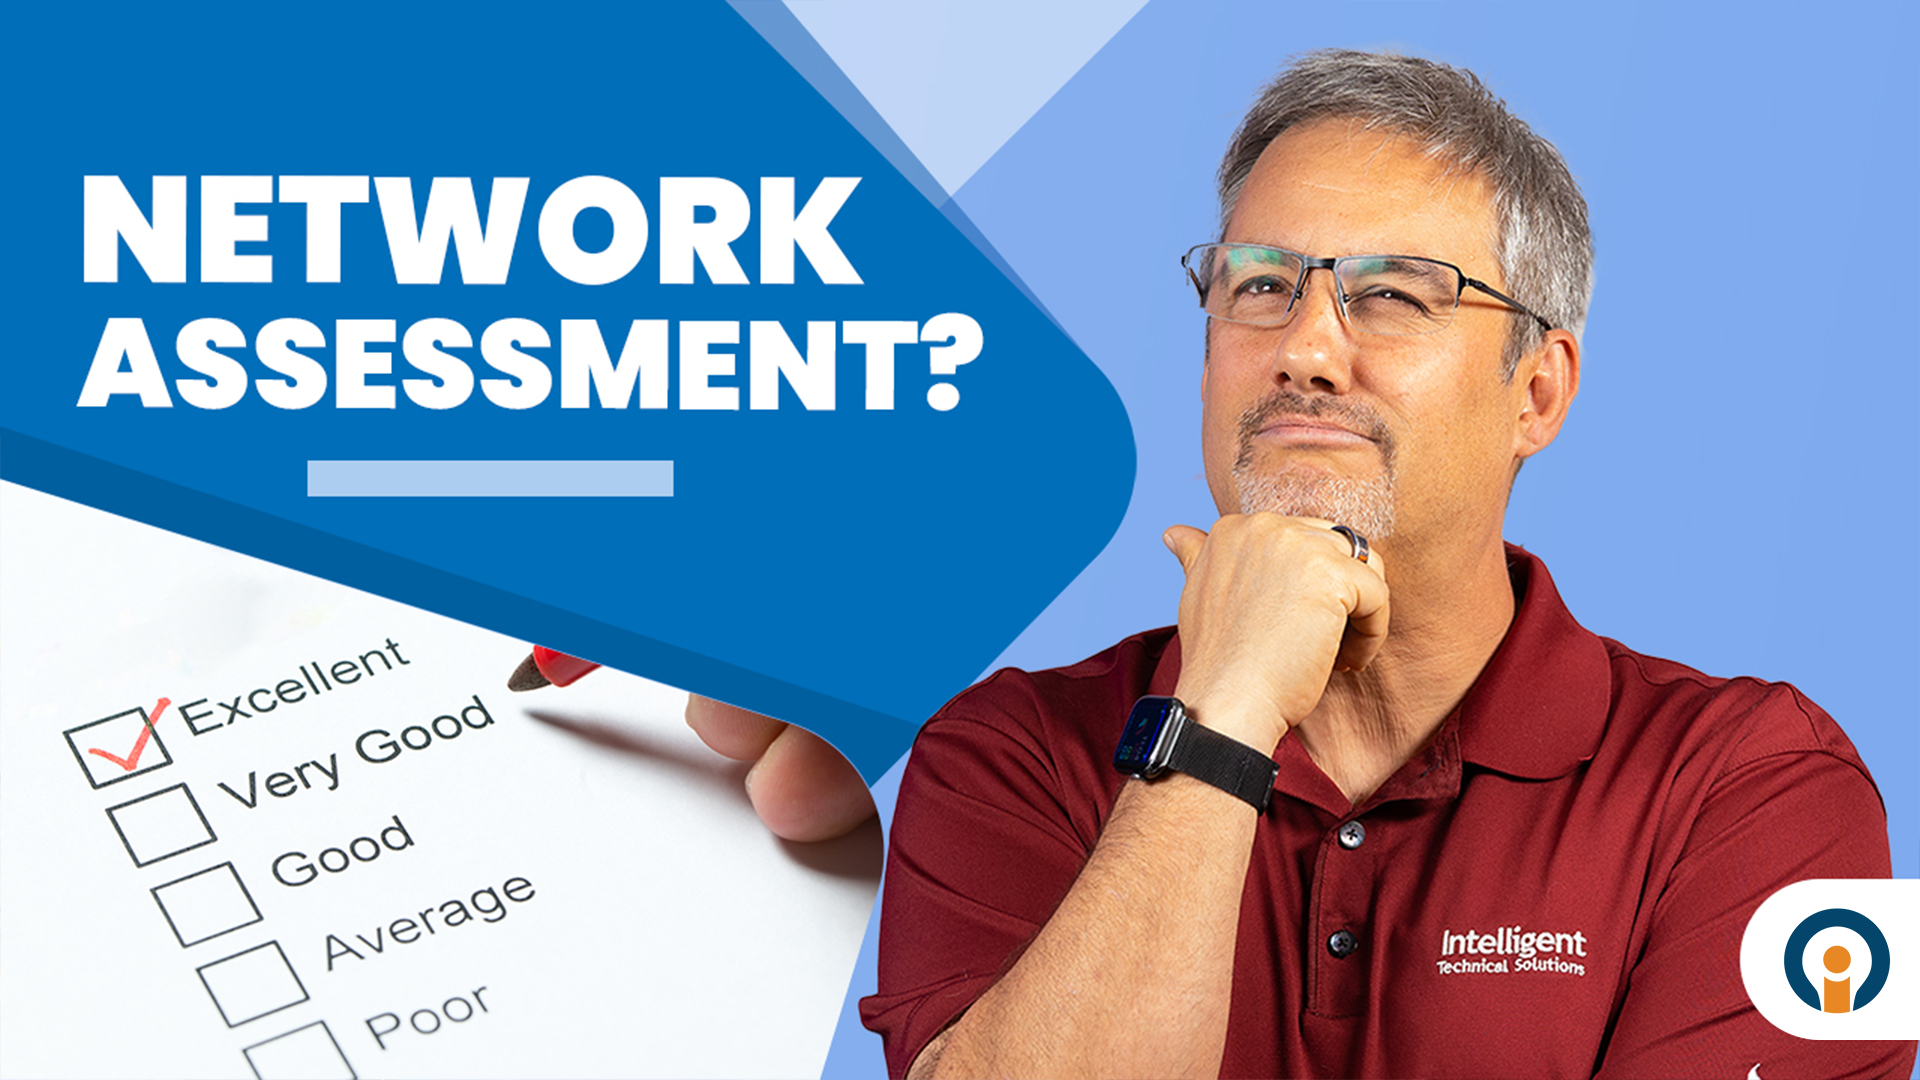 What is Network Assessment